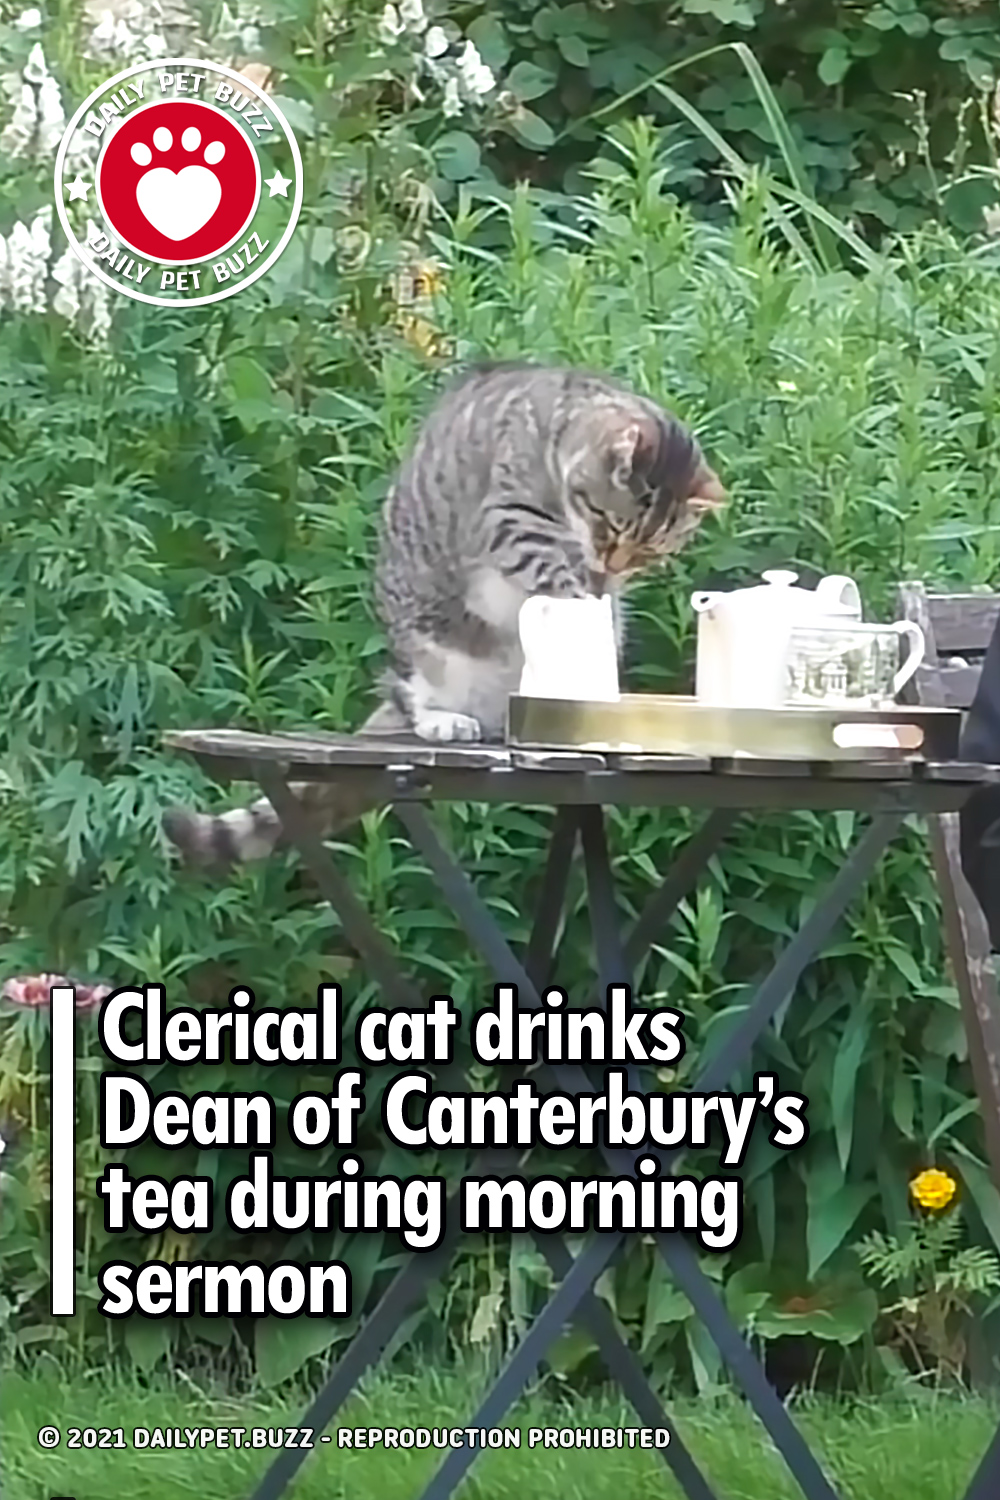 Clerical cat drinks Dean of Canterbury’s tea during morning sermon